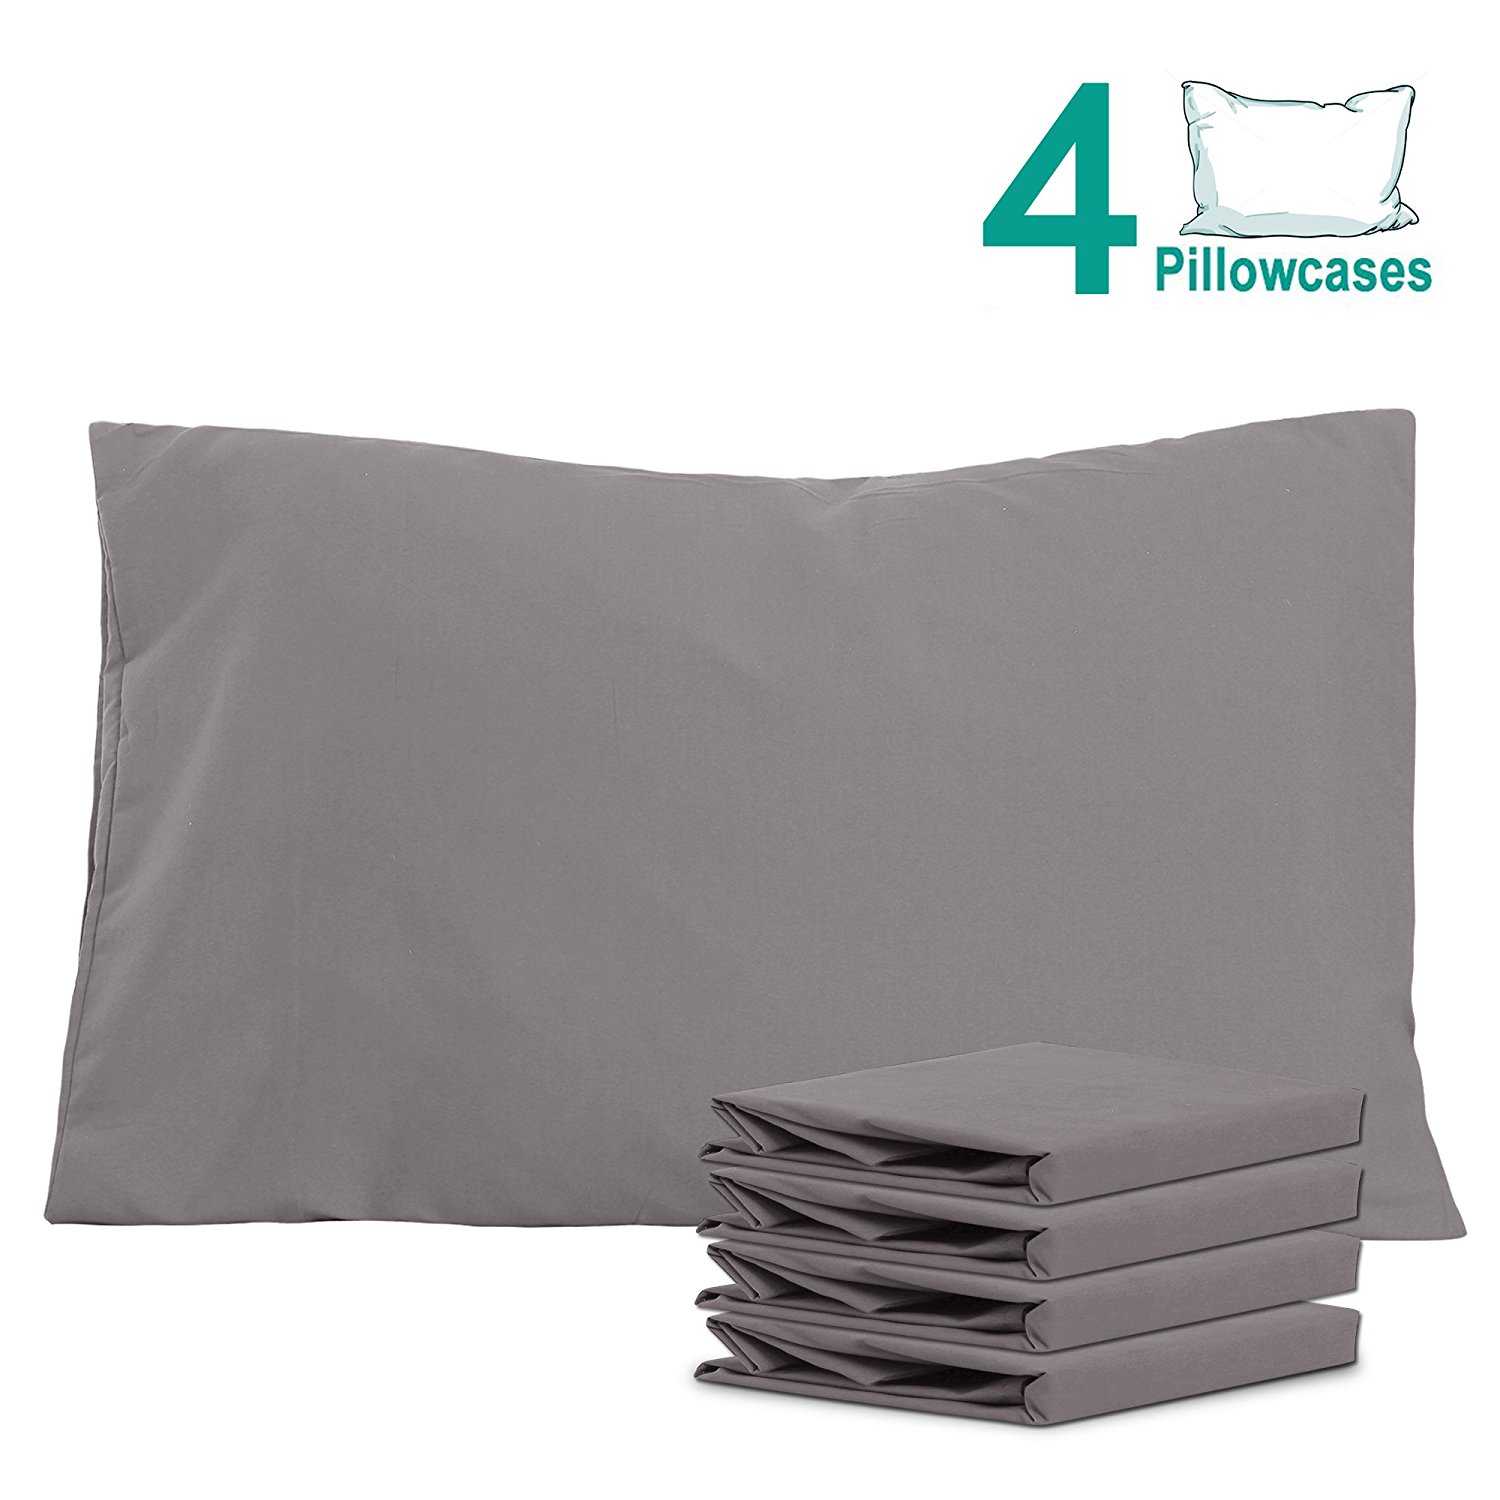 Top 10 Best Pillow Cases in 2021 Top Best Pro Review